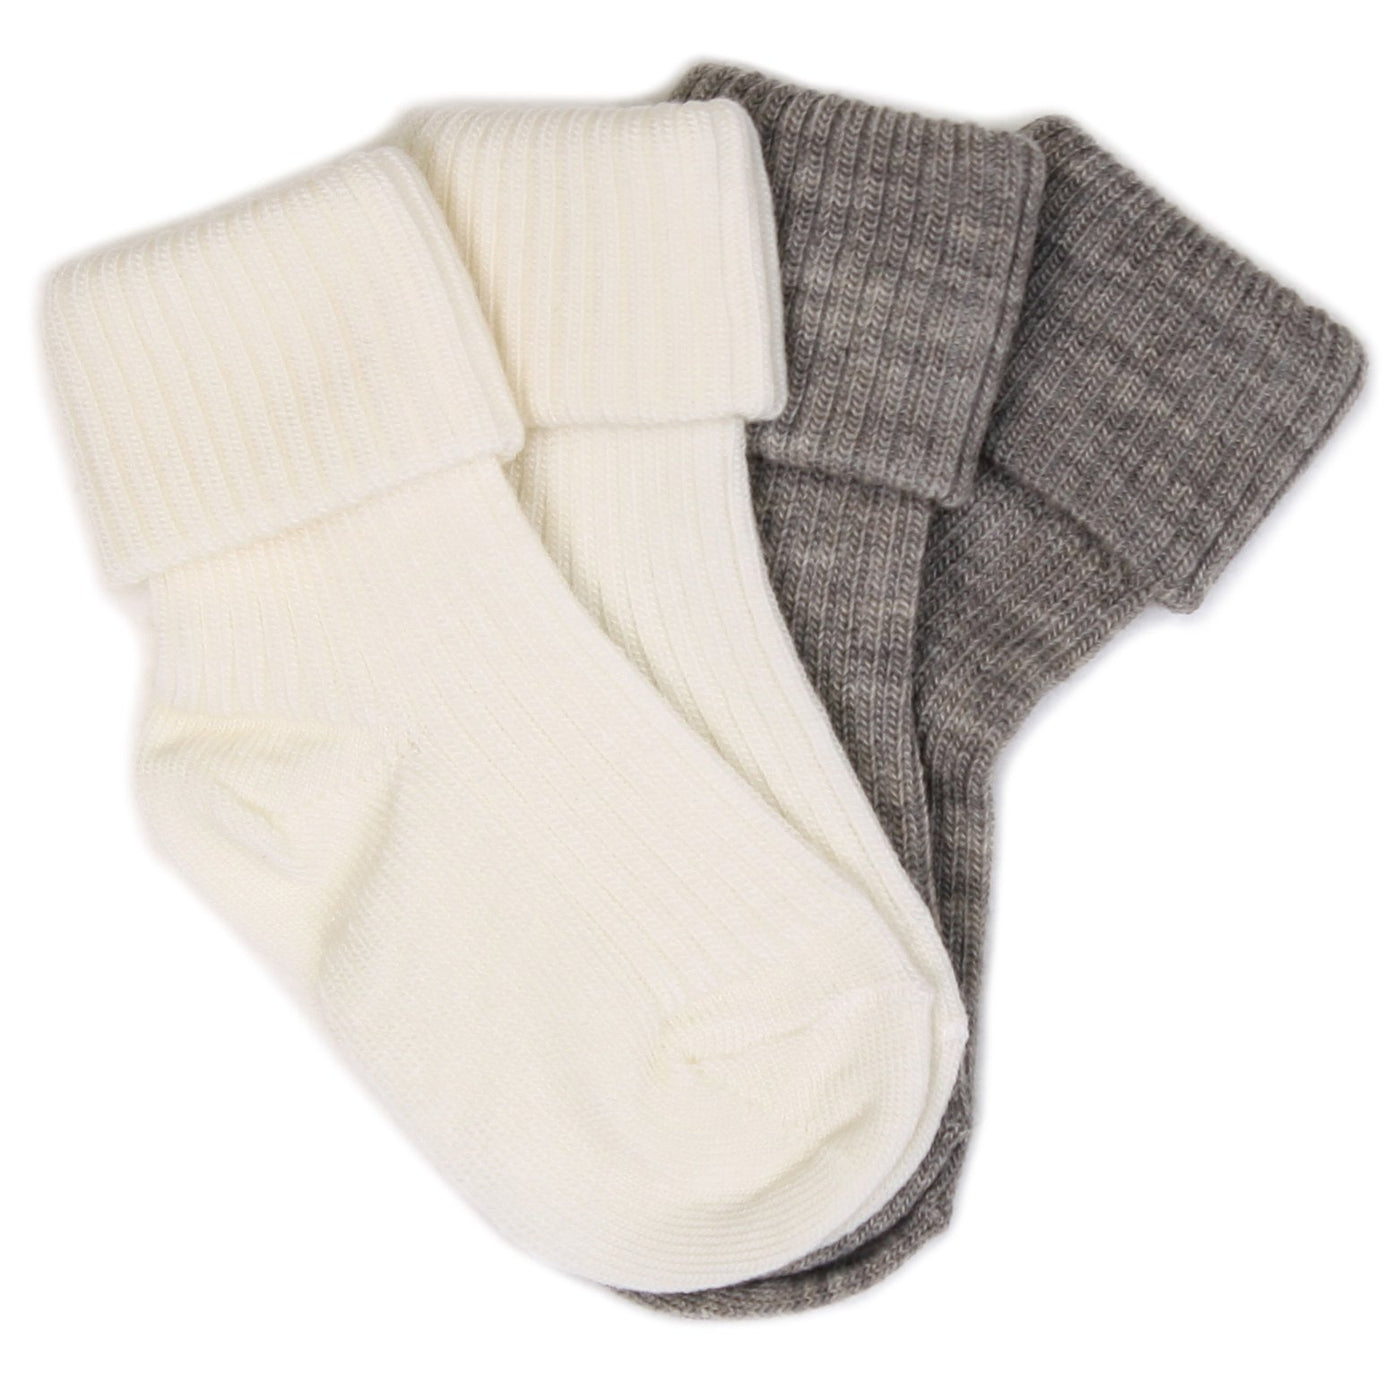 Imperfect Wool Socks, Baby and Toddler, Gray & White - TWO PAIR PACK (discontinued)